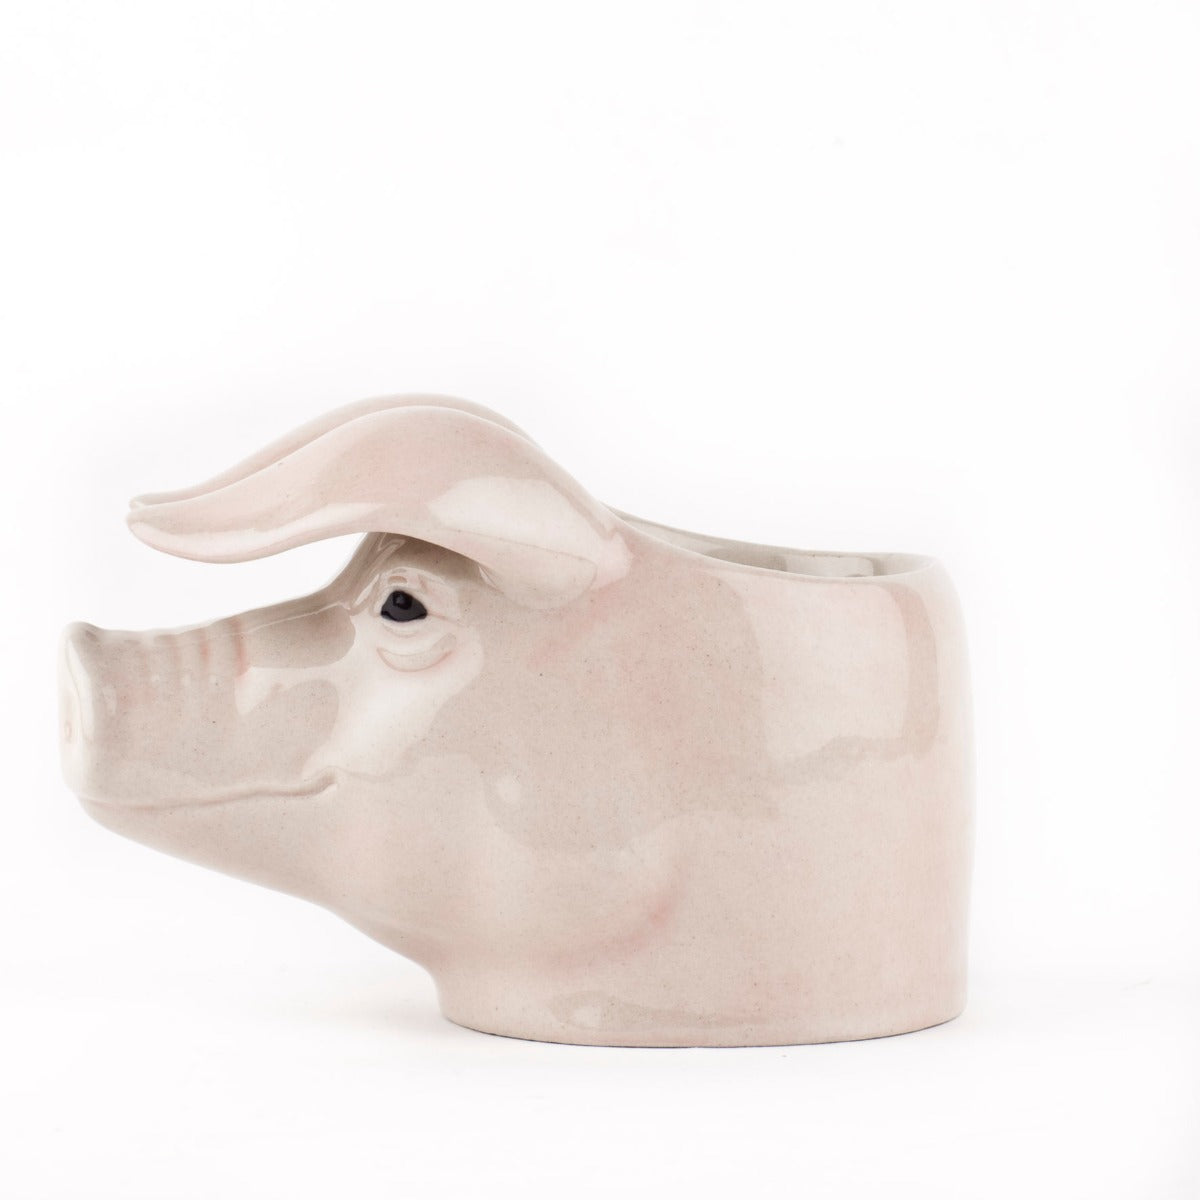 British Lop Pig Face Egg Cup